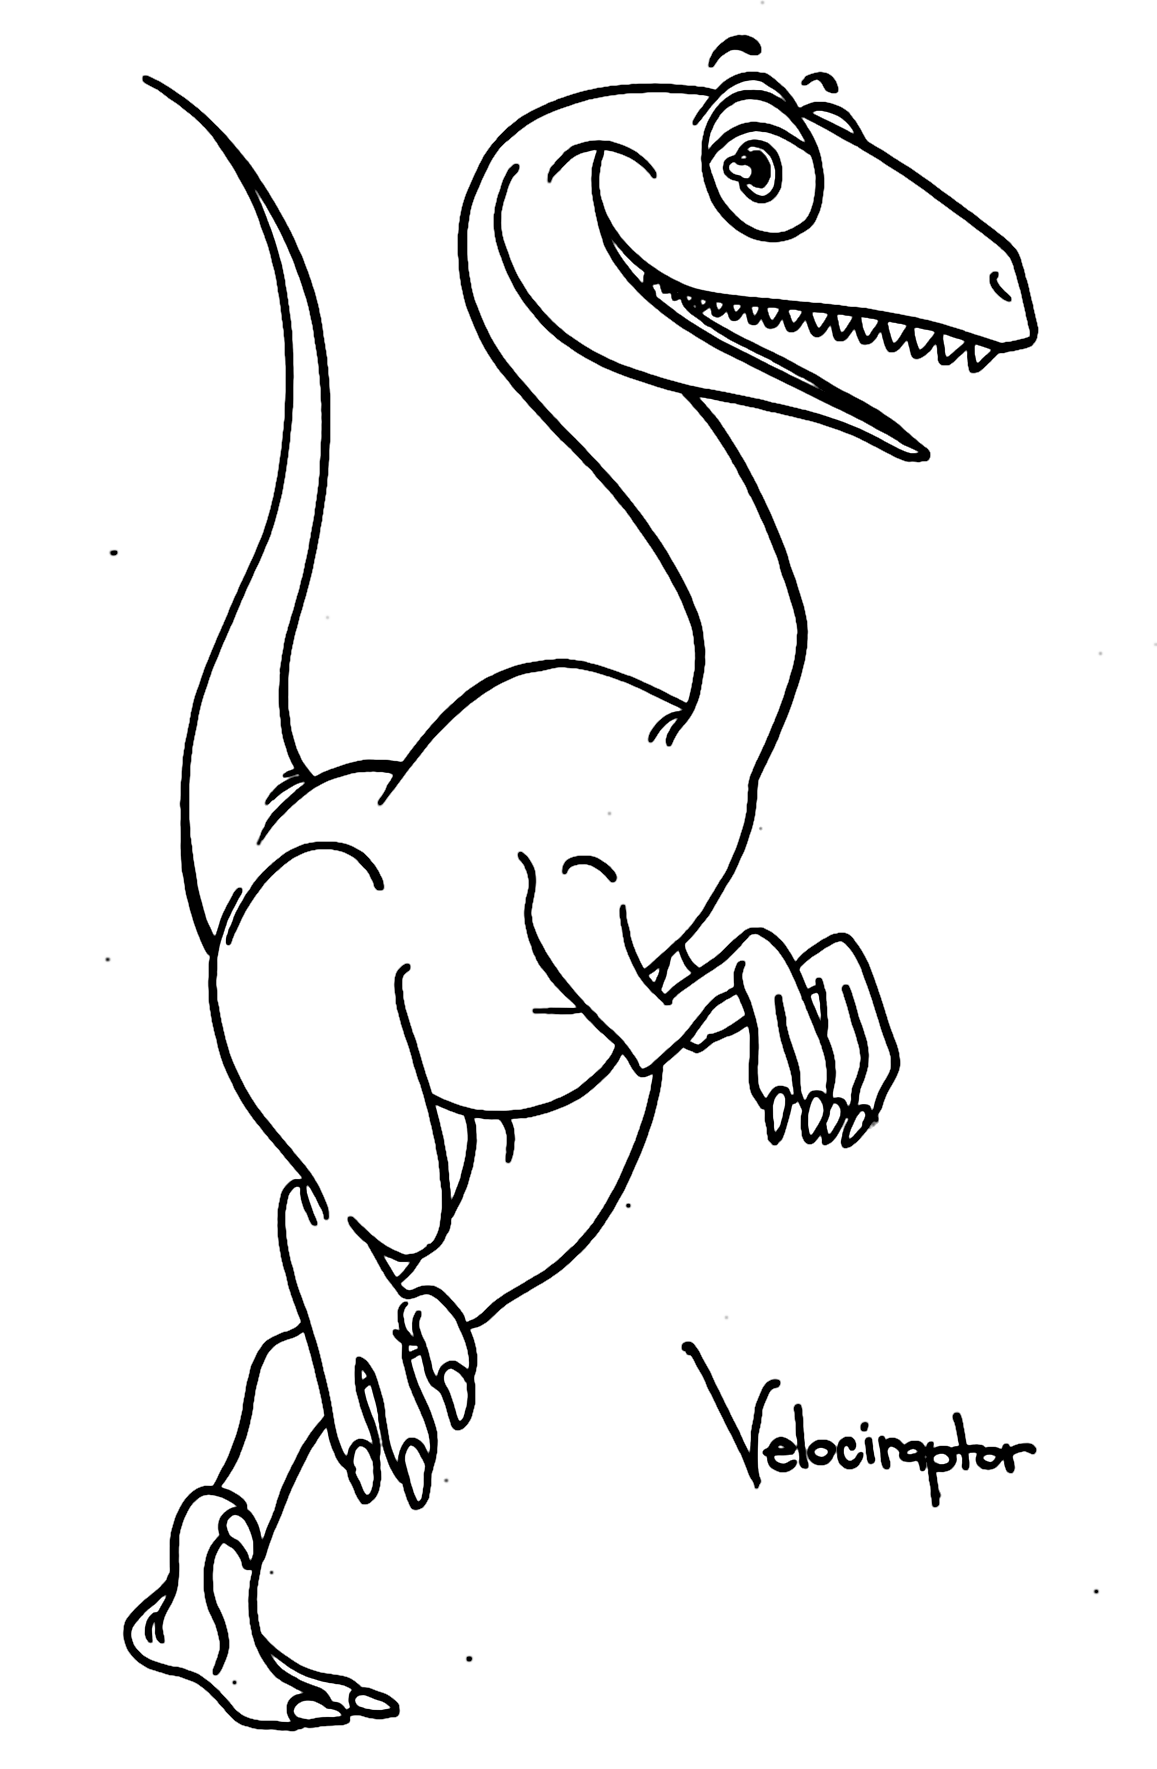 Velociraptor Dinosaur 5 Coloring Pages